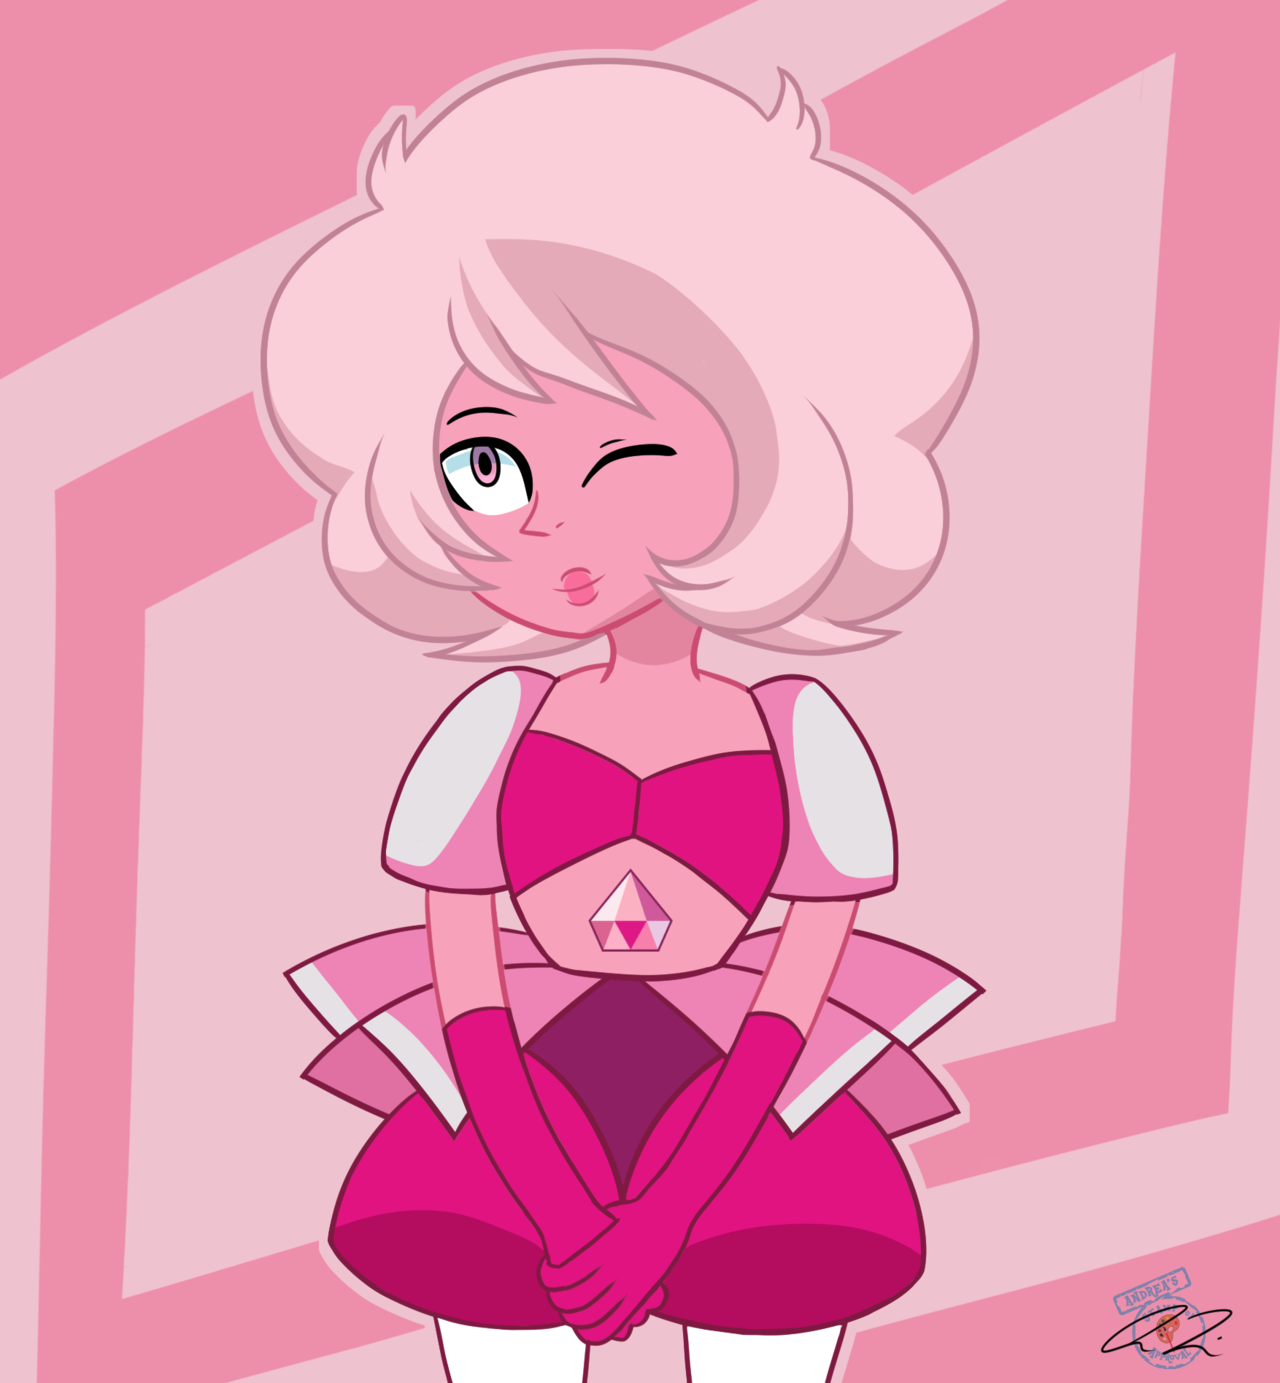 It’s been a month since “A Single Pale Rose” has aired and I’m still not over it ;o; I got Clip Studio Paint today and decided to draw Pink Diamond as a practice ;w;